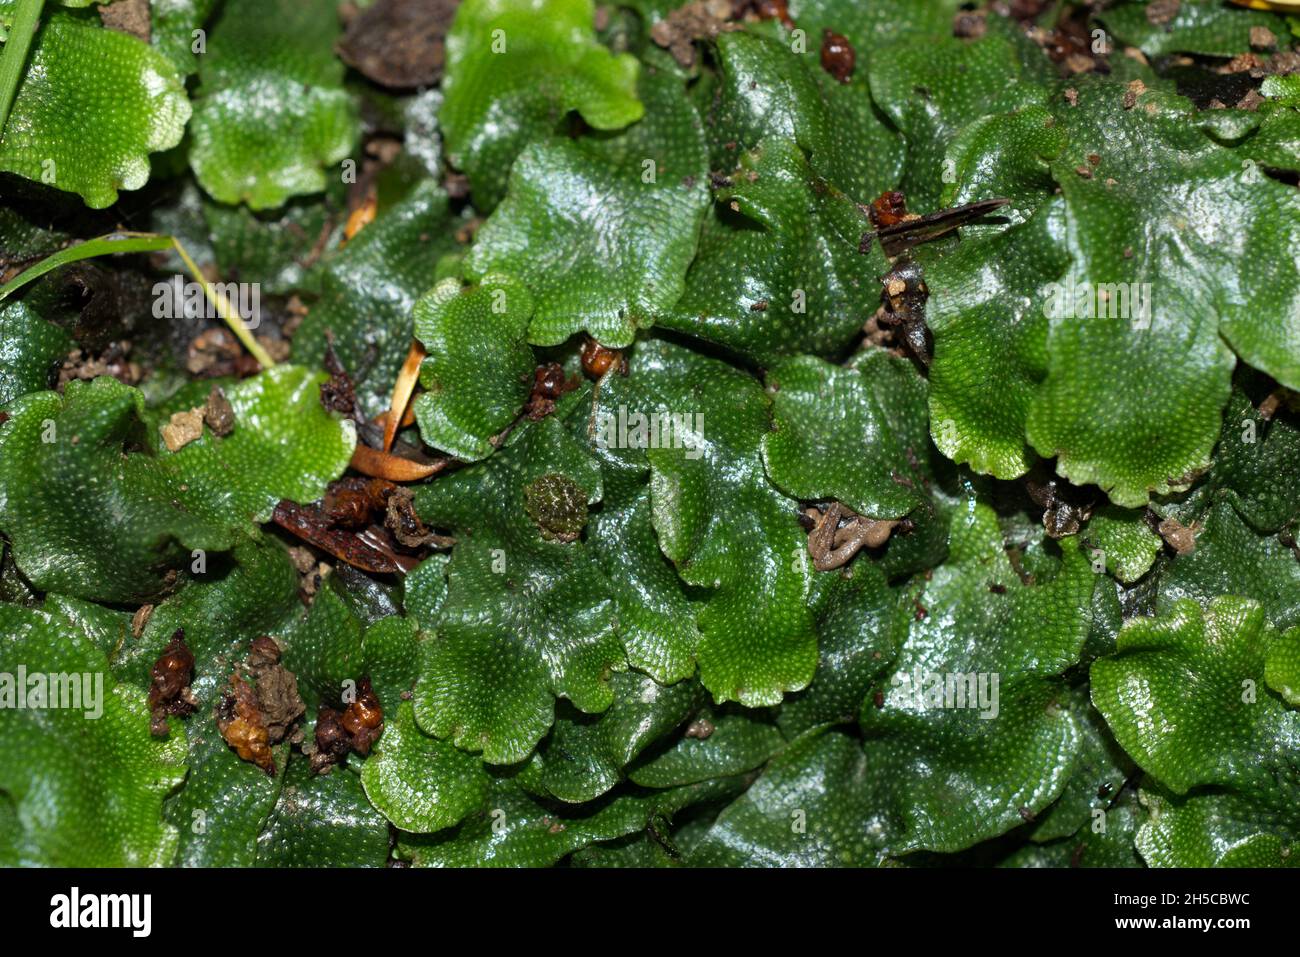 A close view of Great Scented Liverwort (Conocephalum conicum) growing on a rock in a stream bank, Sussex, England, UK. Stock Photo